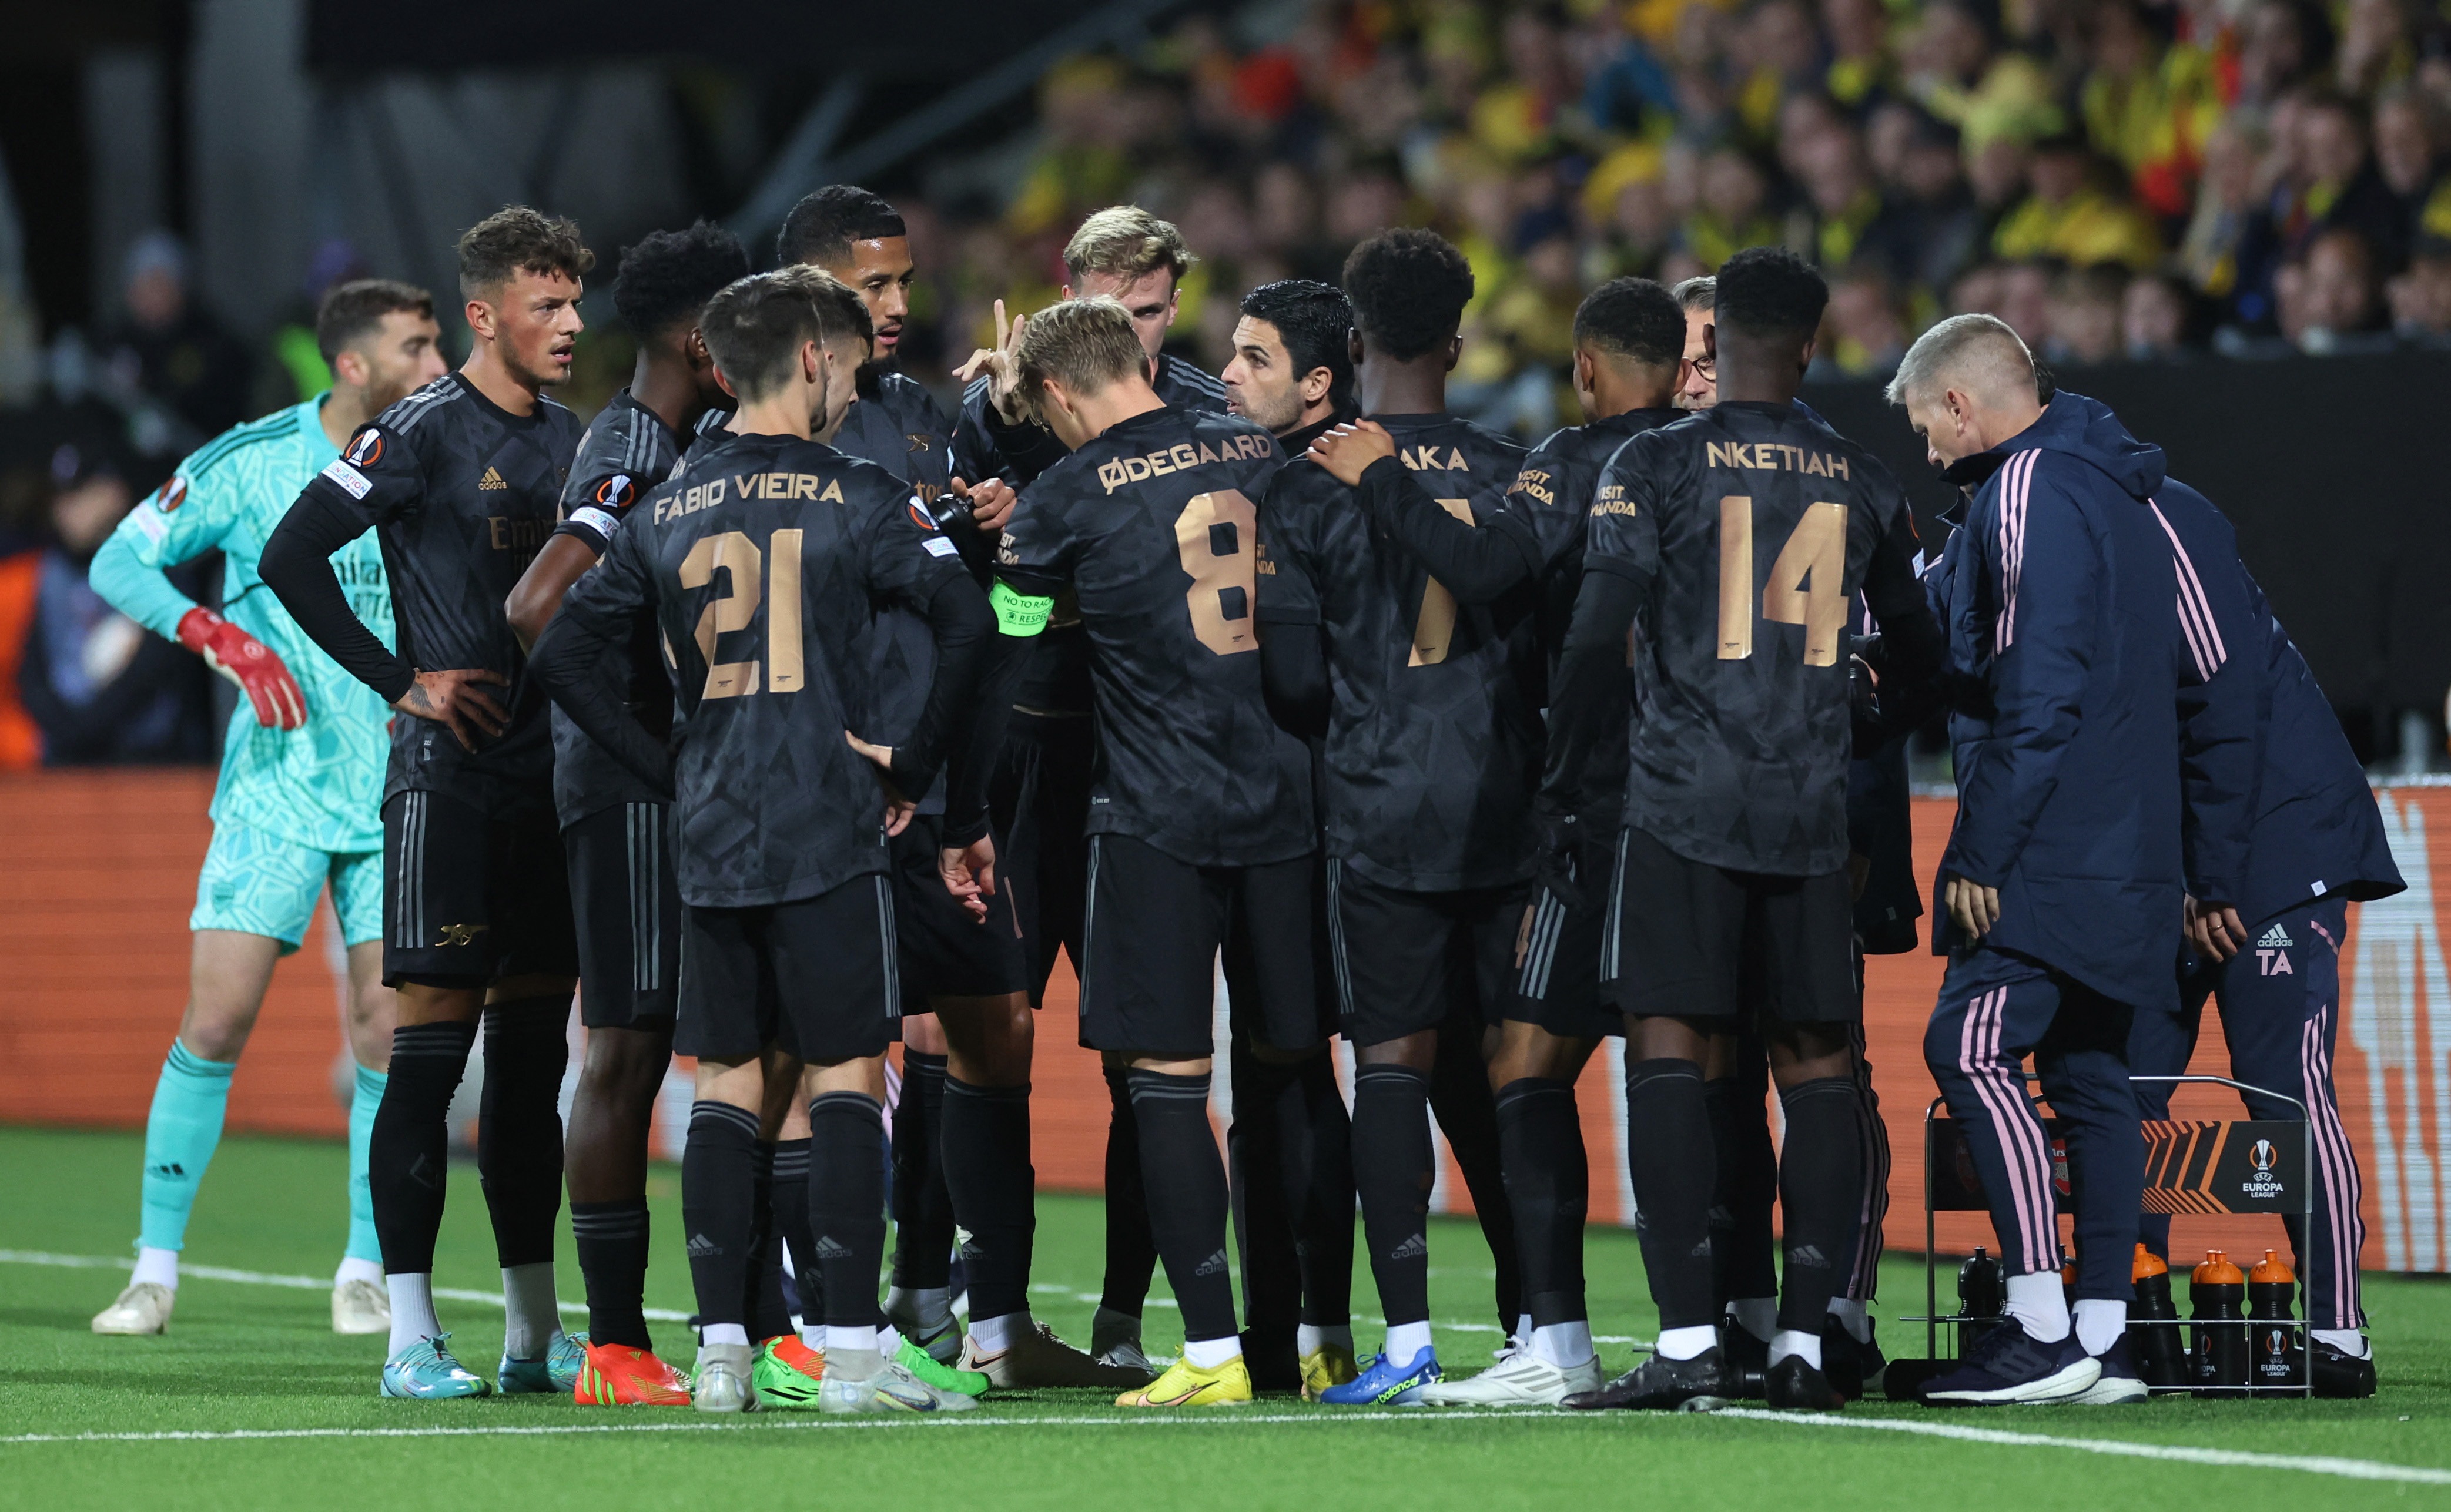 , Bodo/Glimt 0 Arsenal 1: Bukayo Saka scores winner and all-but secures Gunners’ spot in Europa League knockout stages